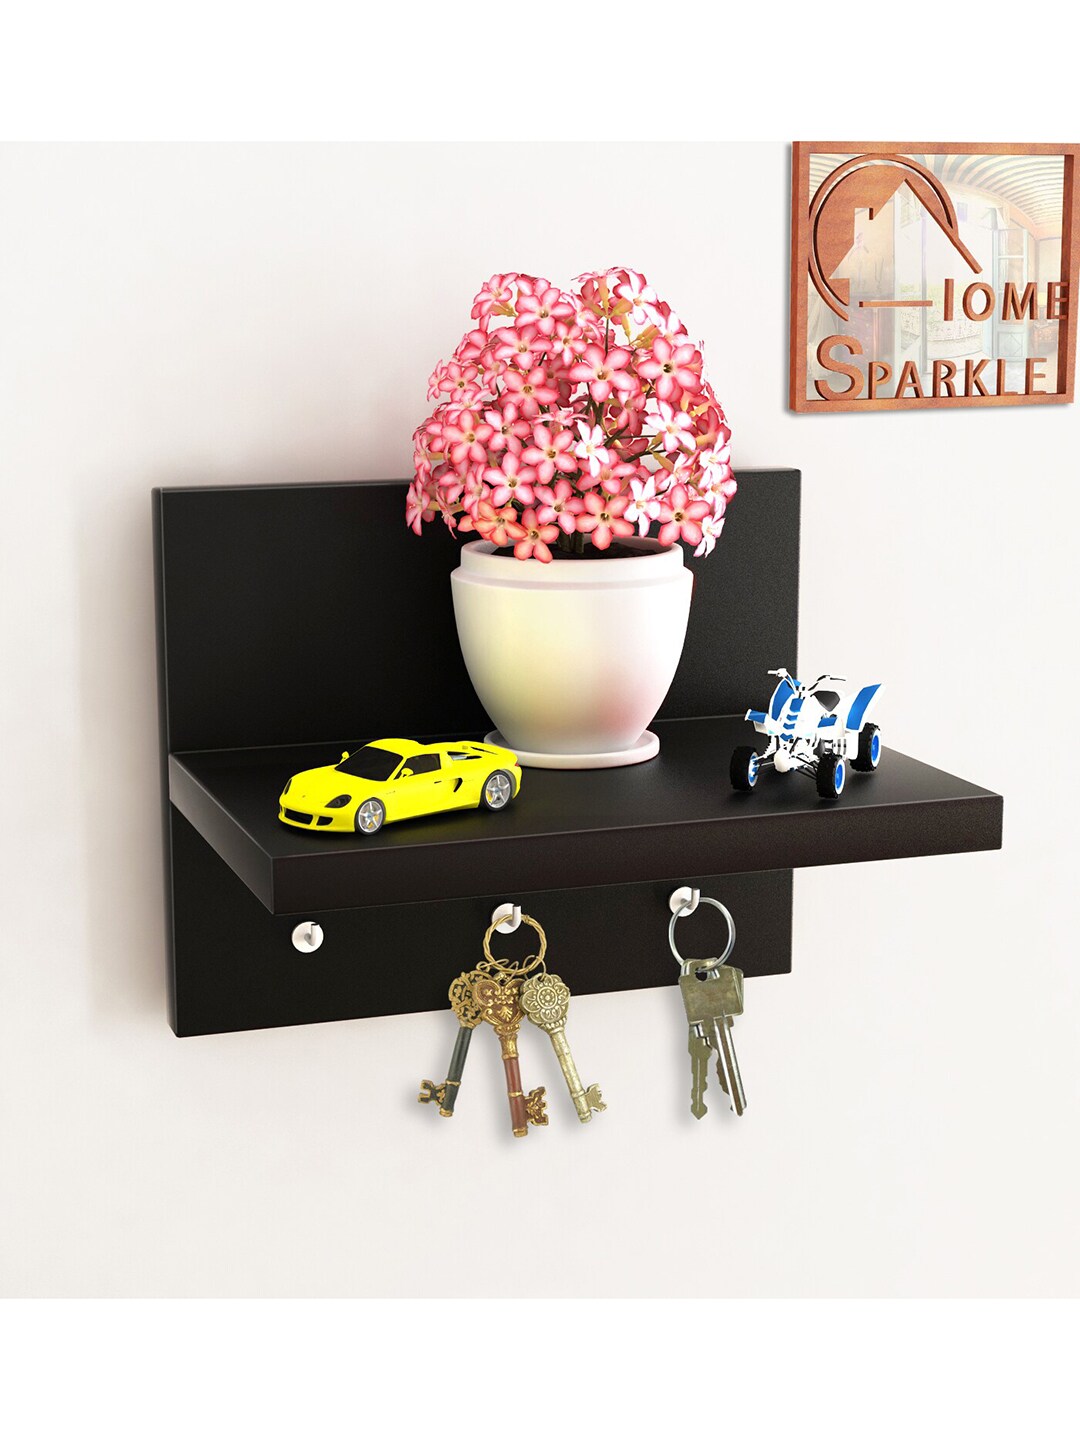 Home Sparkle MDF Wall Shelf with Key Holders Price in India